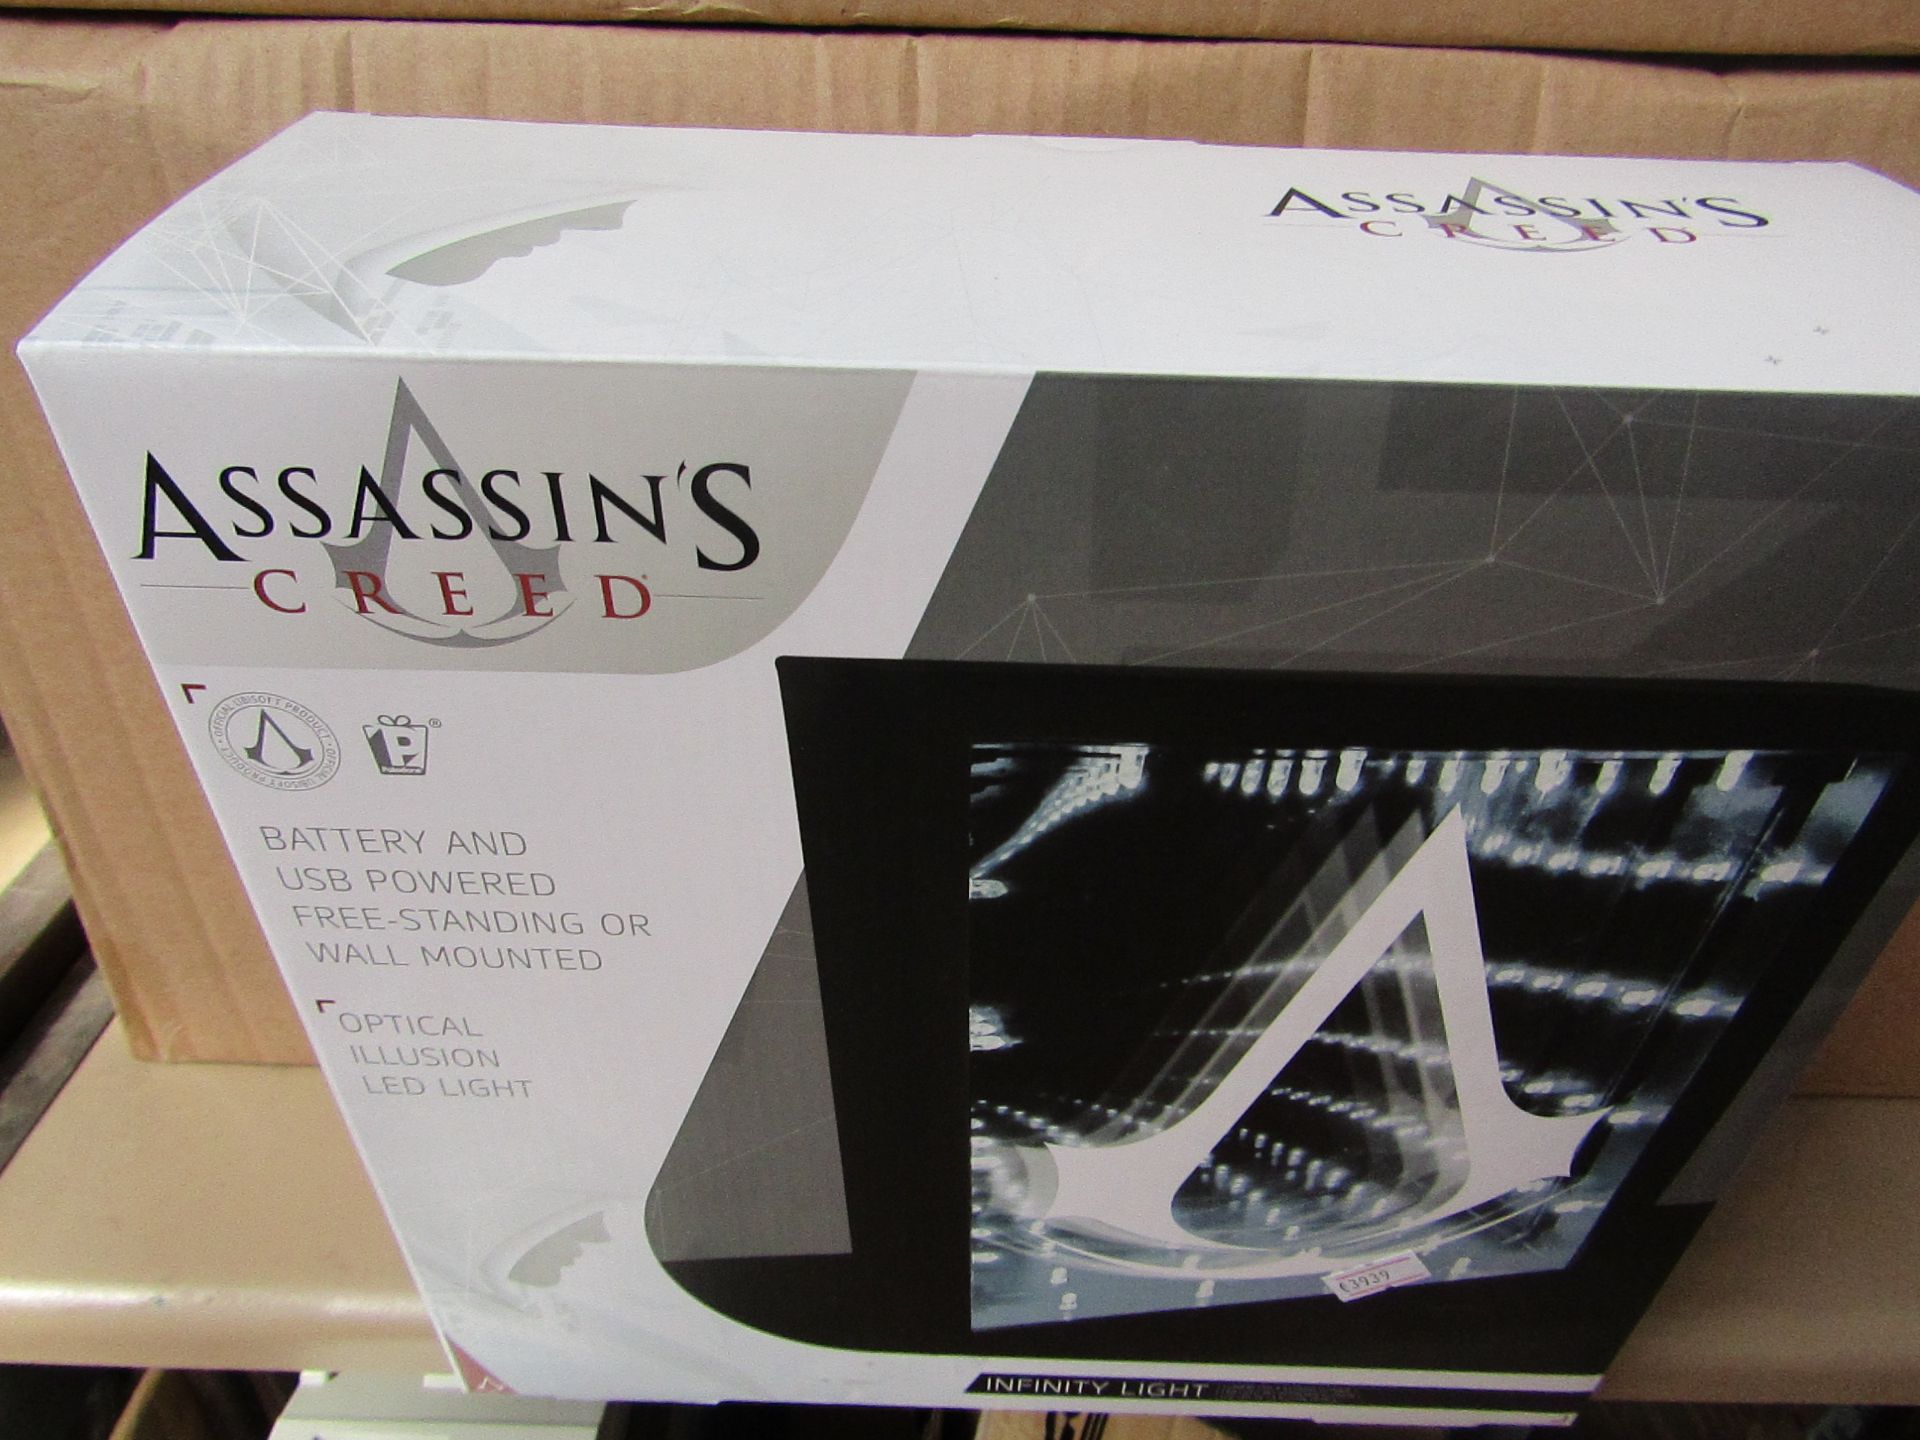 6x Assassins Creed Optical Illusion LED Light, new and boxed.